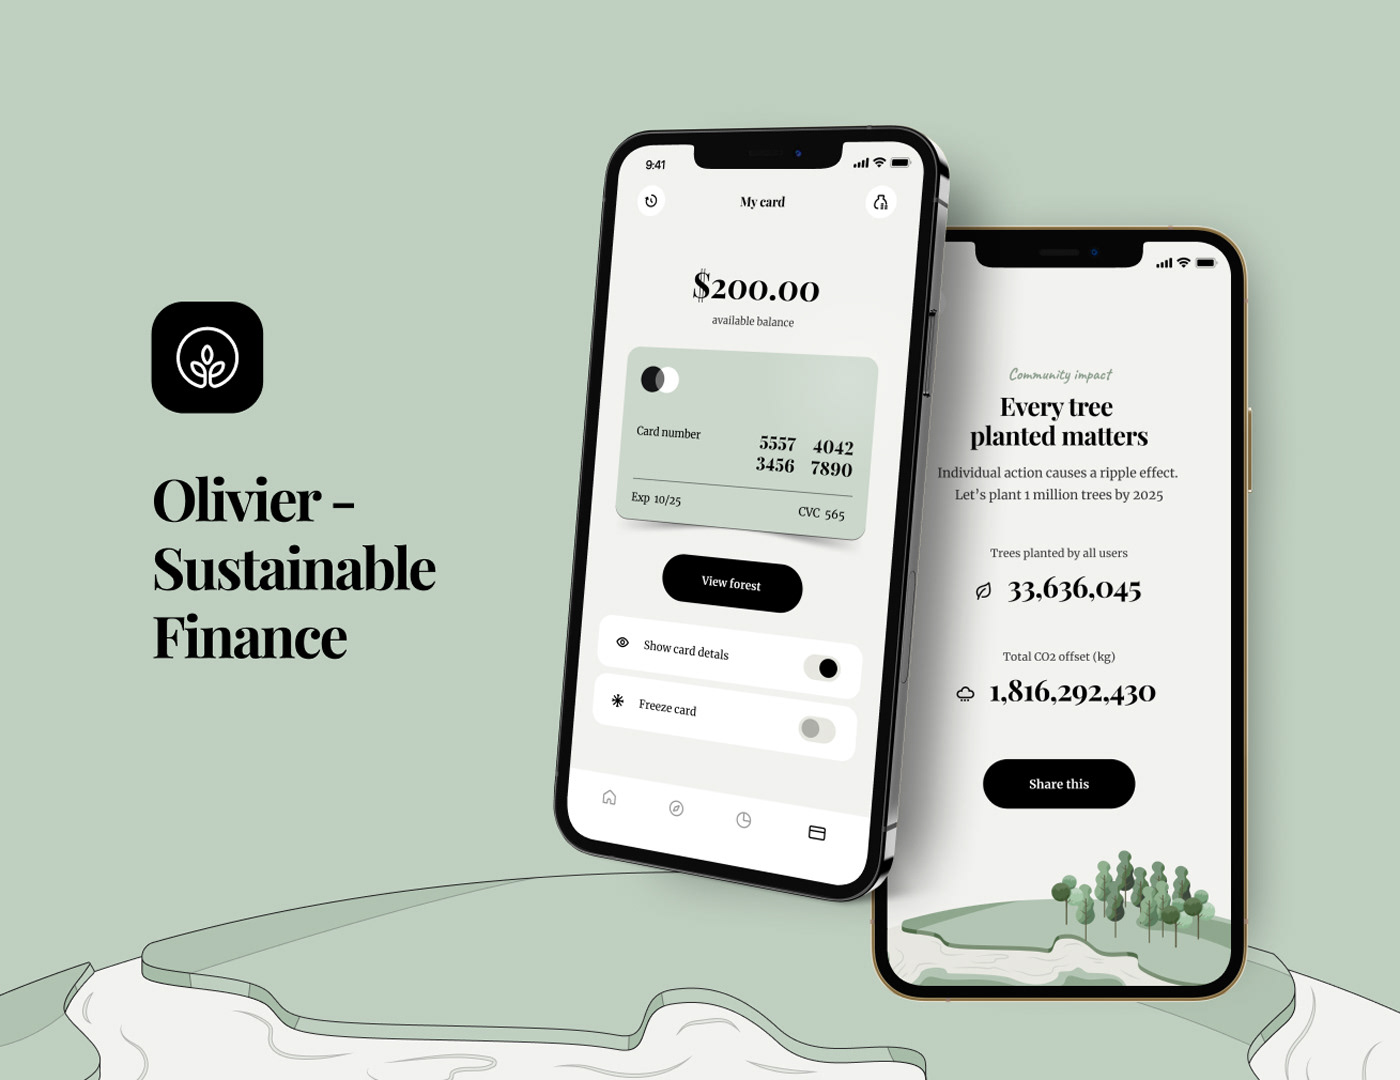 Olivier is sustainable investing app that takes a company or investment's impact on the environment